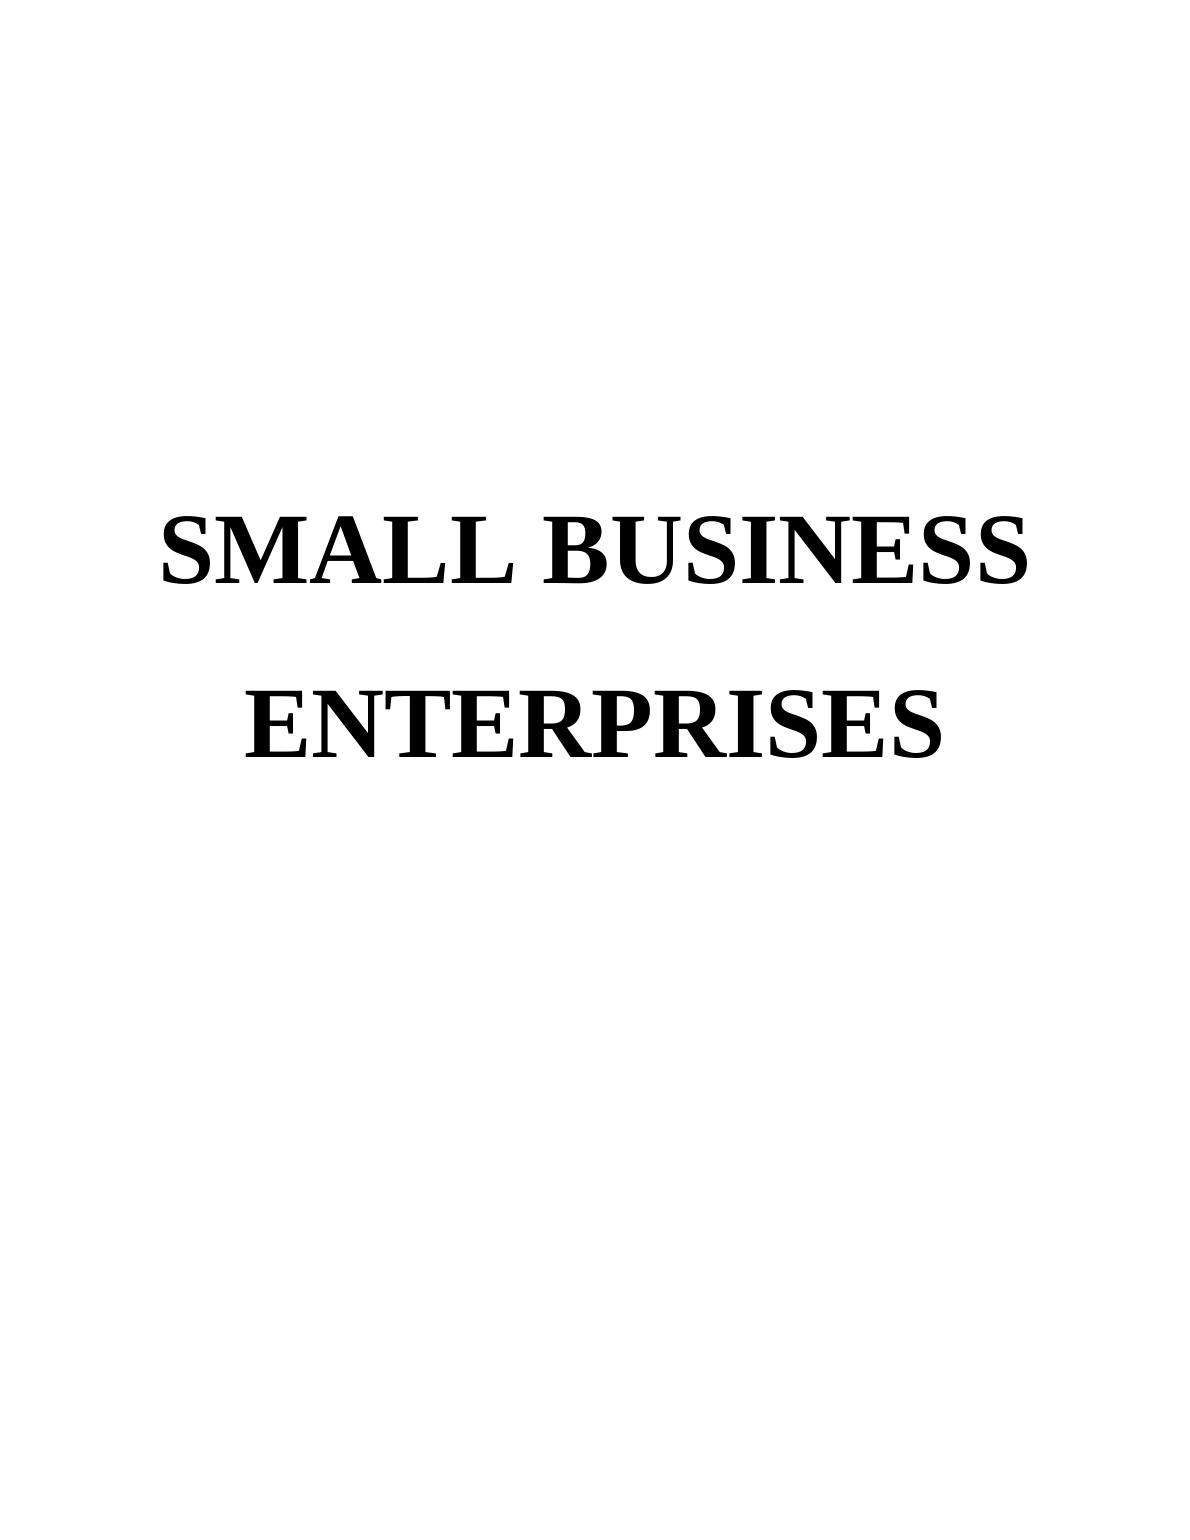 Report on Strength and Weakness of Small Business Enterprise_1